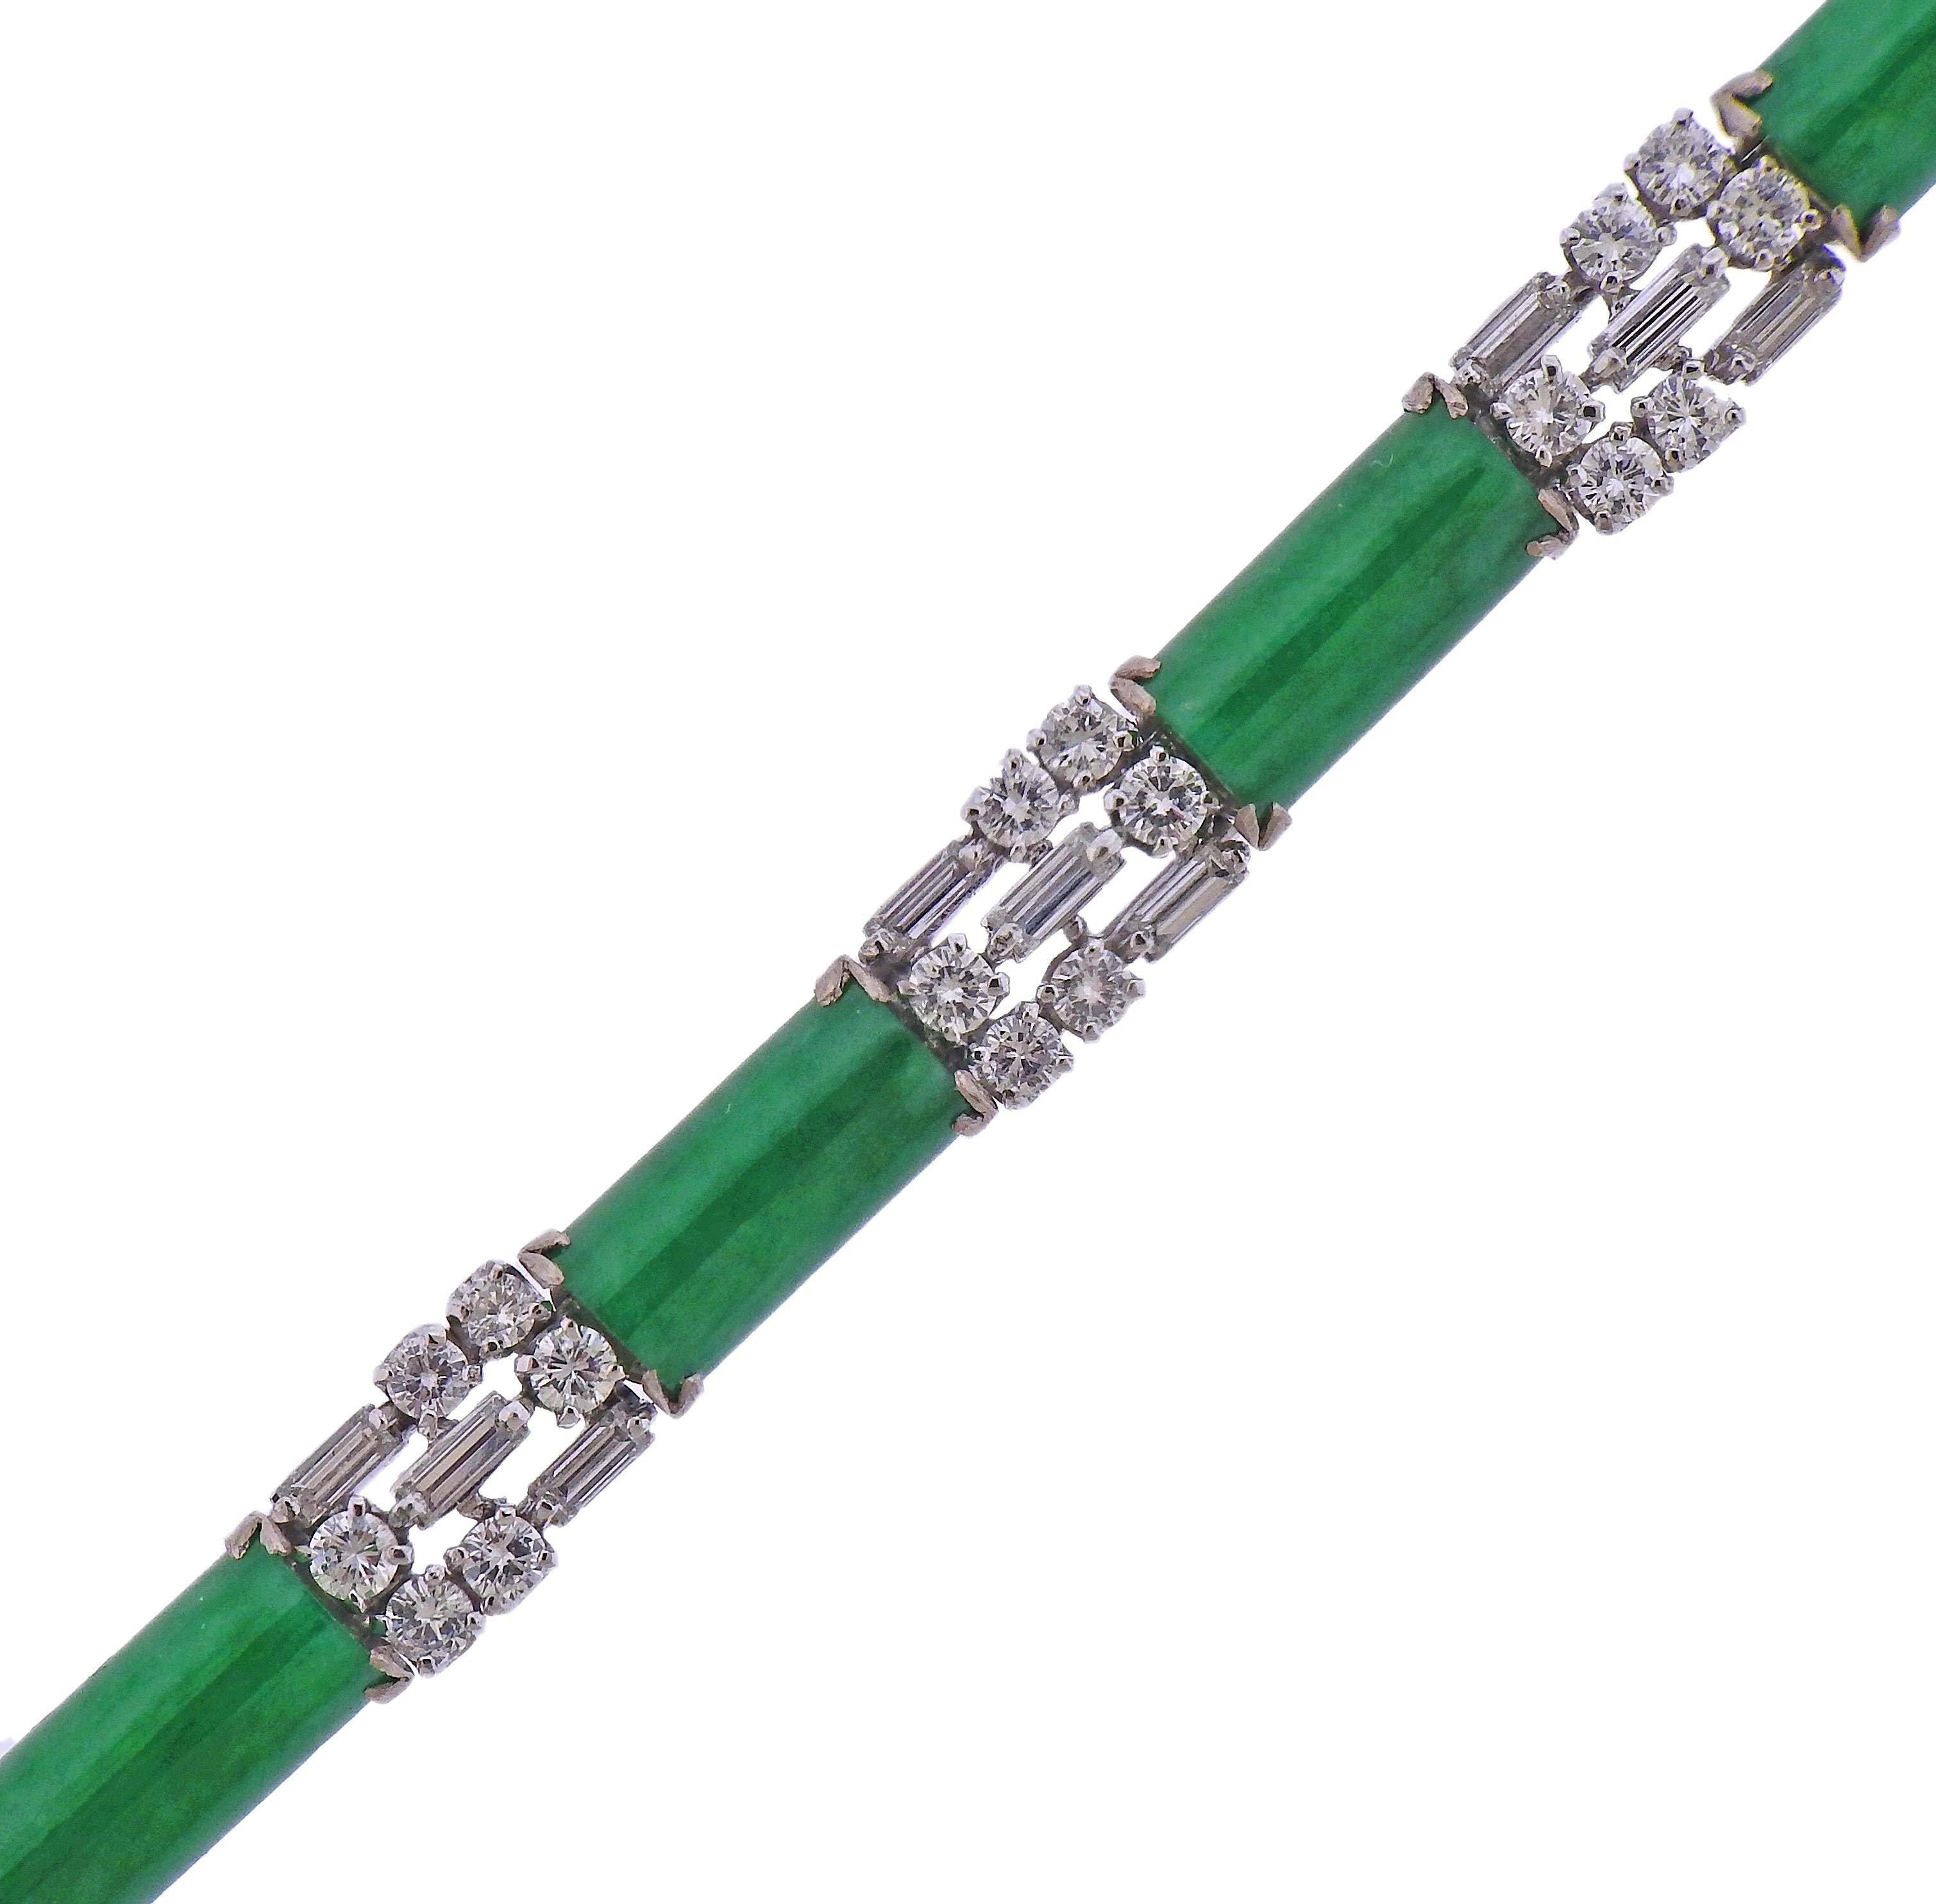 14k white gold bracelet, with 8 natural jadeite jade stones - measuring approx. 11.3 x 5.4mm, with approx. 3.20ctw in diamonds. Bracelet is 6.75